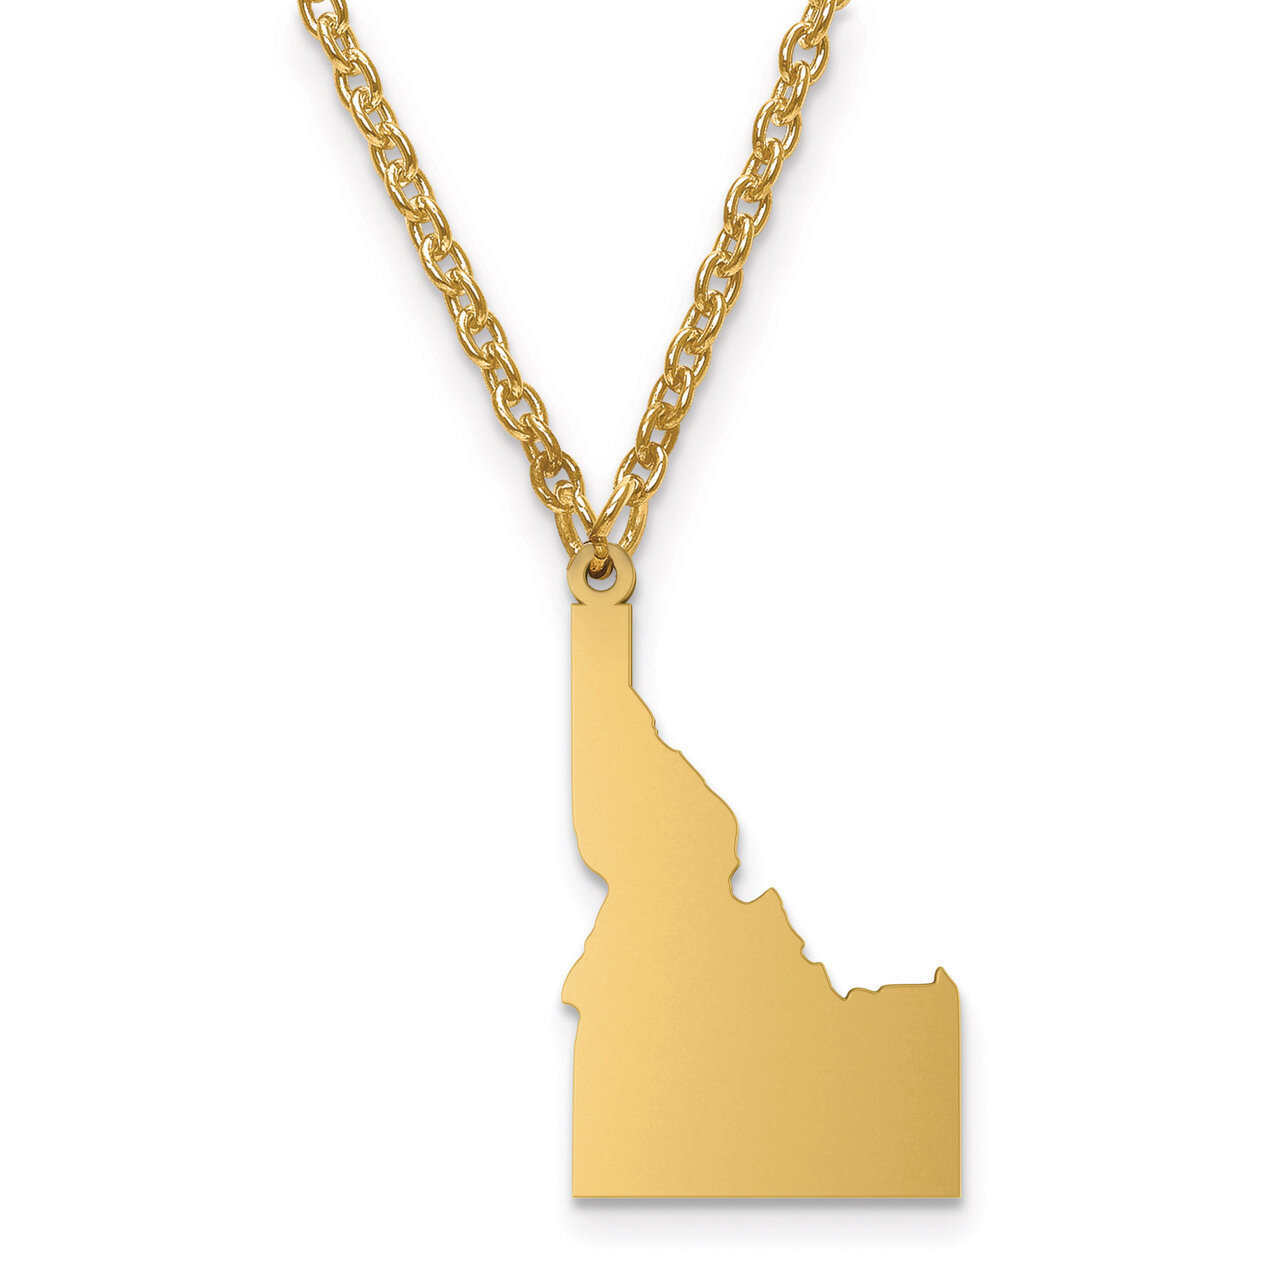 Idaho State Pendant with Chain Engravable Gold-plated on Sterling Silver